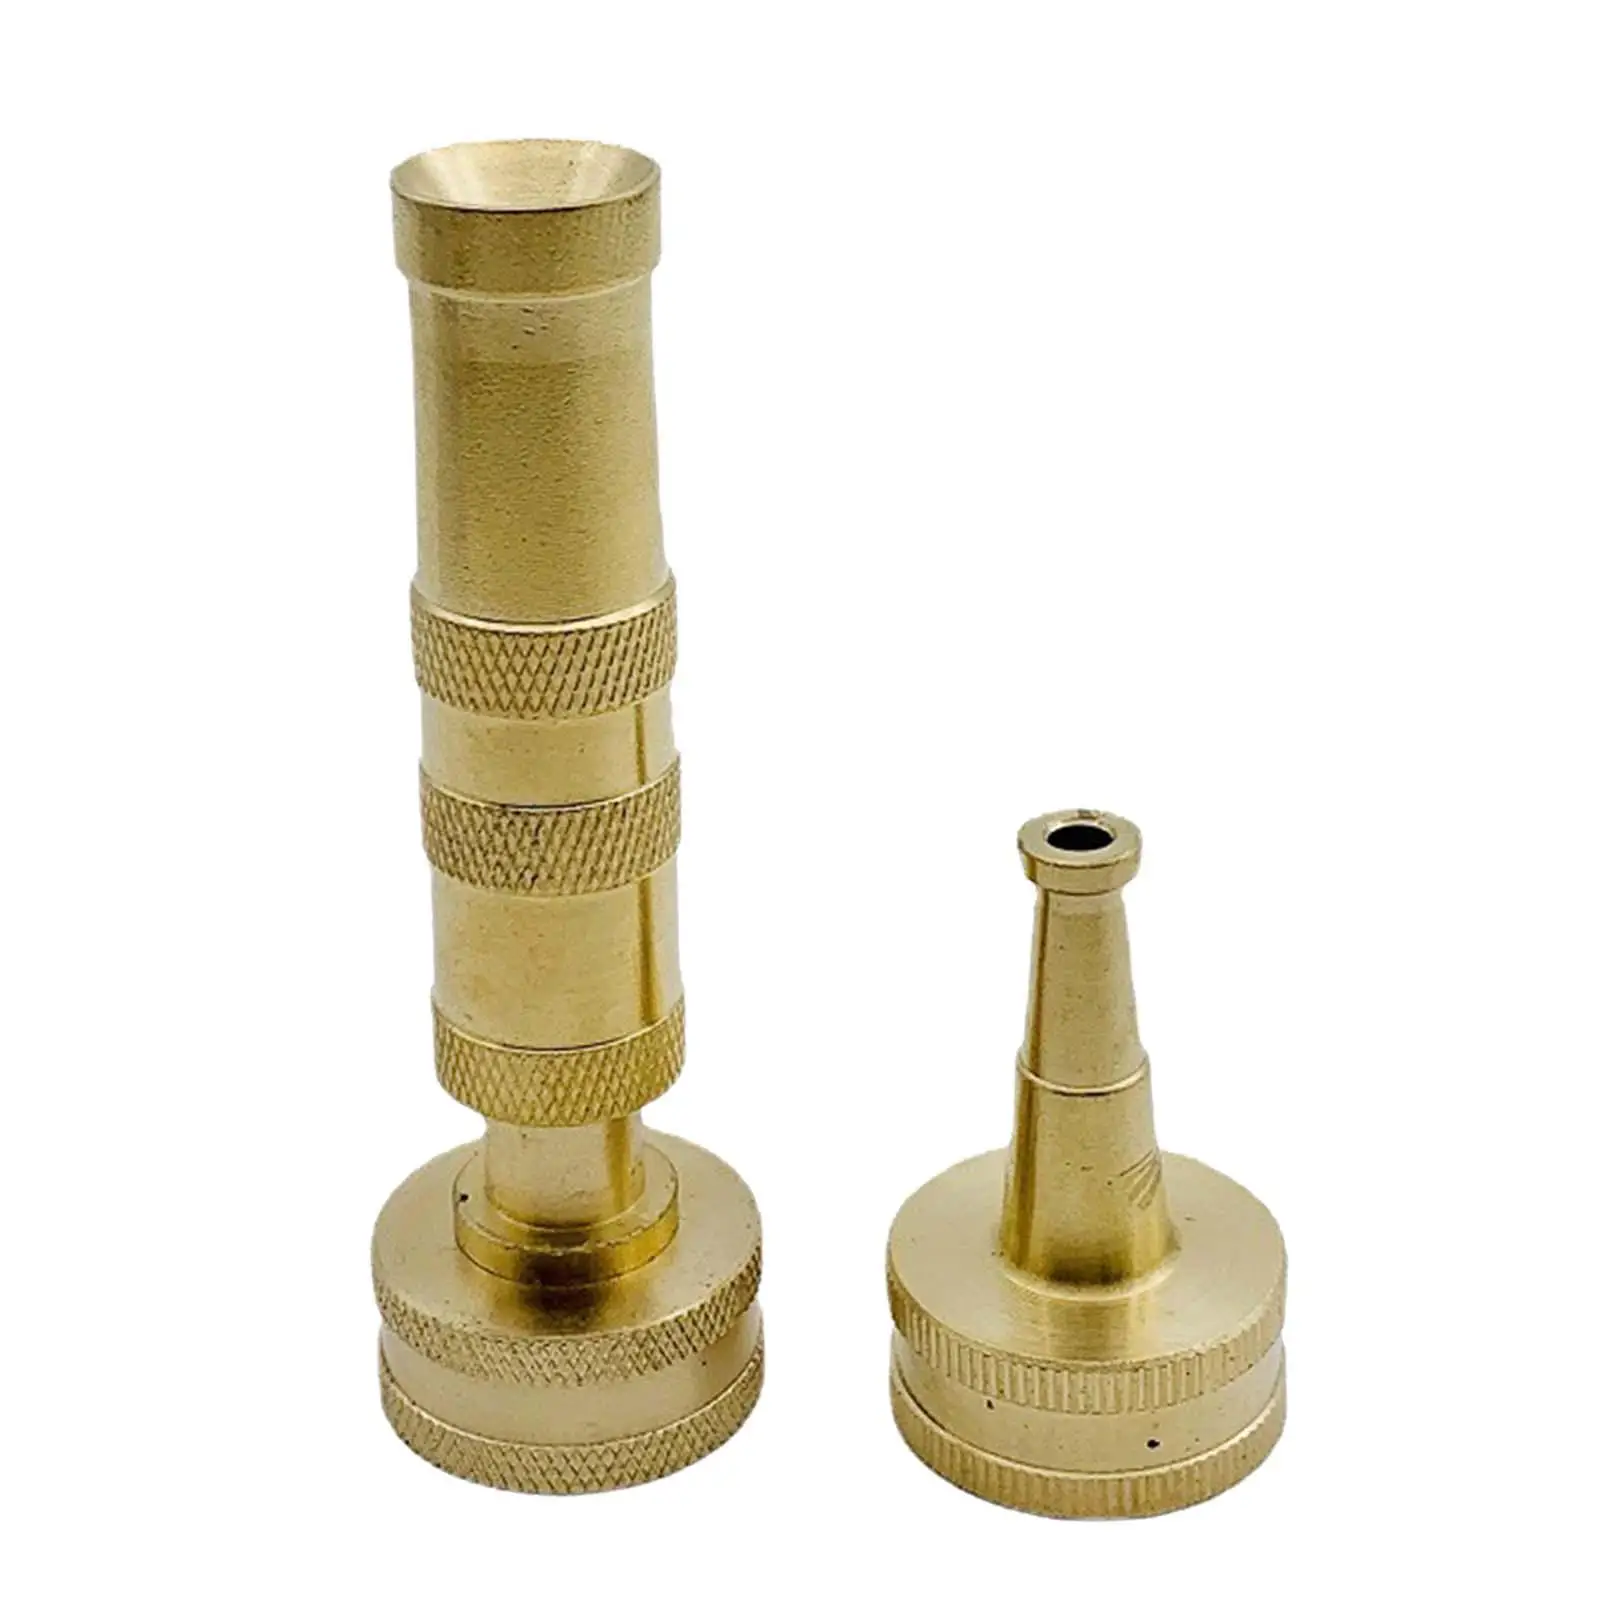 Solid Brass Hose Nozzle for Garden Heavy Duty Metal Twist Hose Nozzle Jet Sweeper Nozzle for Plants House Yard car Wash